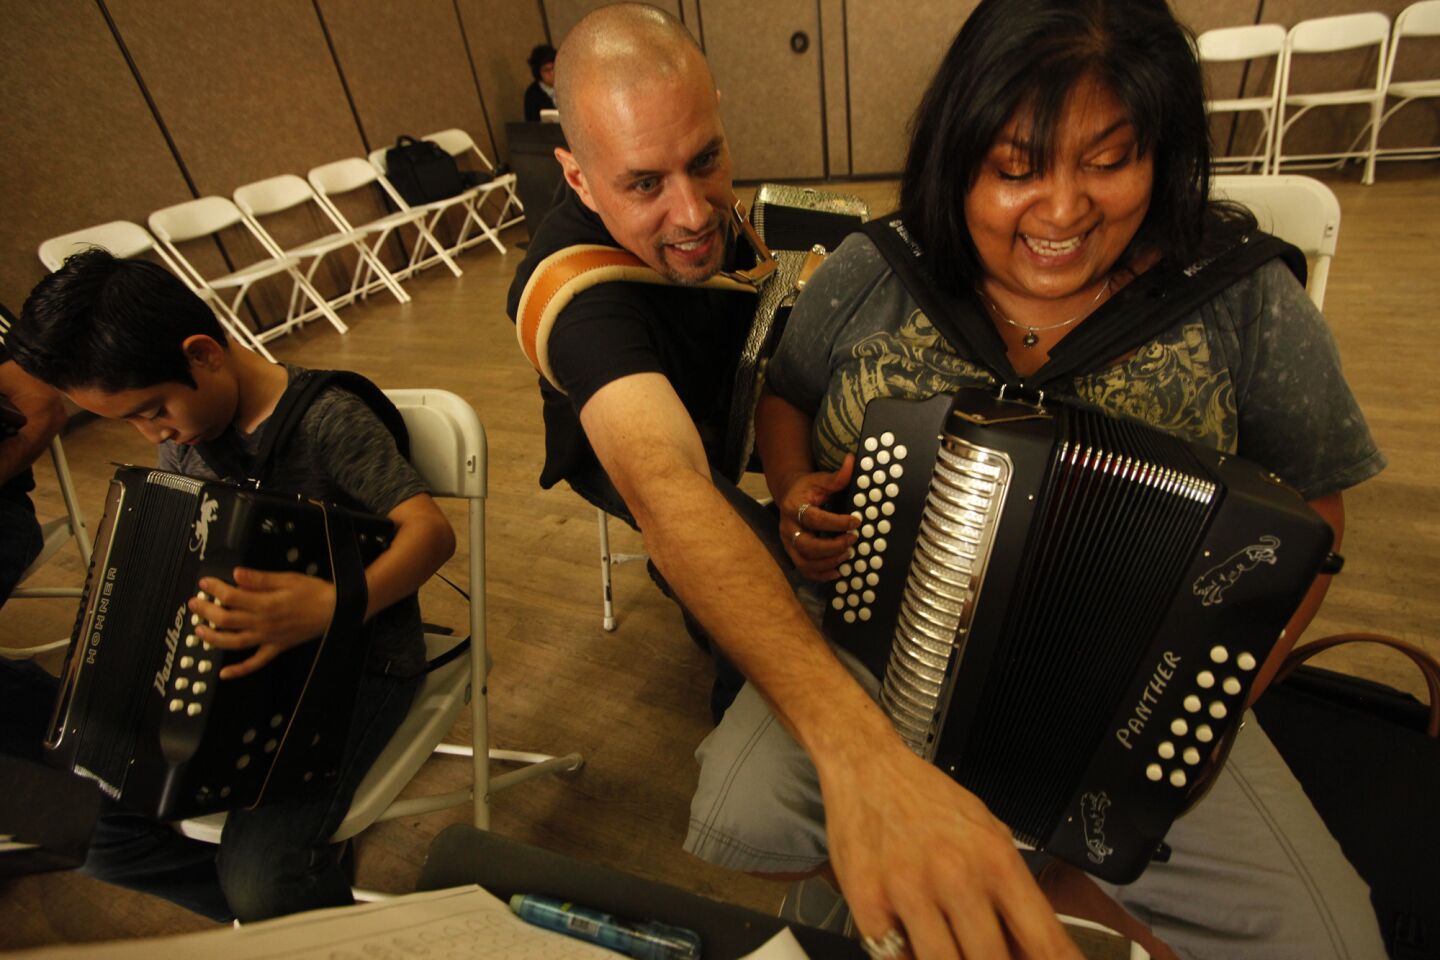 Otono Lujan helps student Sylvia Gonzales with a new song while teaching his weekly Saturday morning class on playing the button accordion. Lujan, who plays in a band called Conjunto Los Pochos, has been teaching students how to play the accordion for many years.